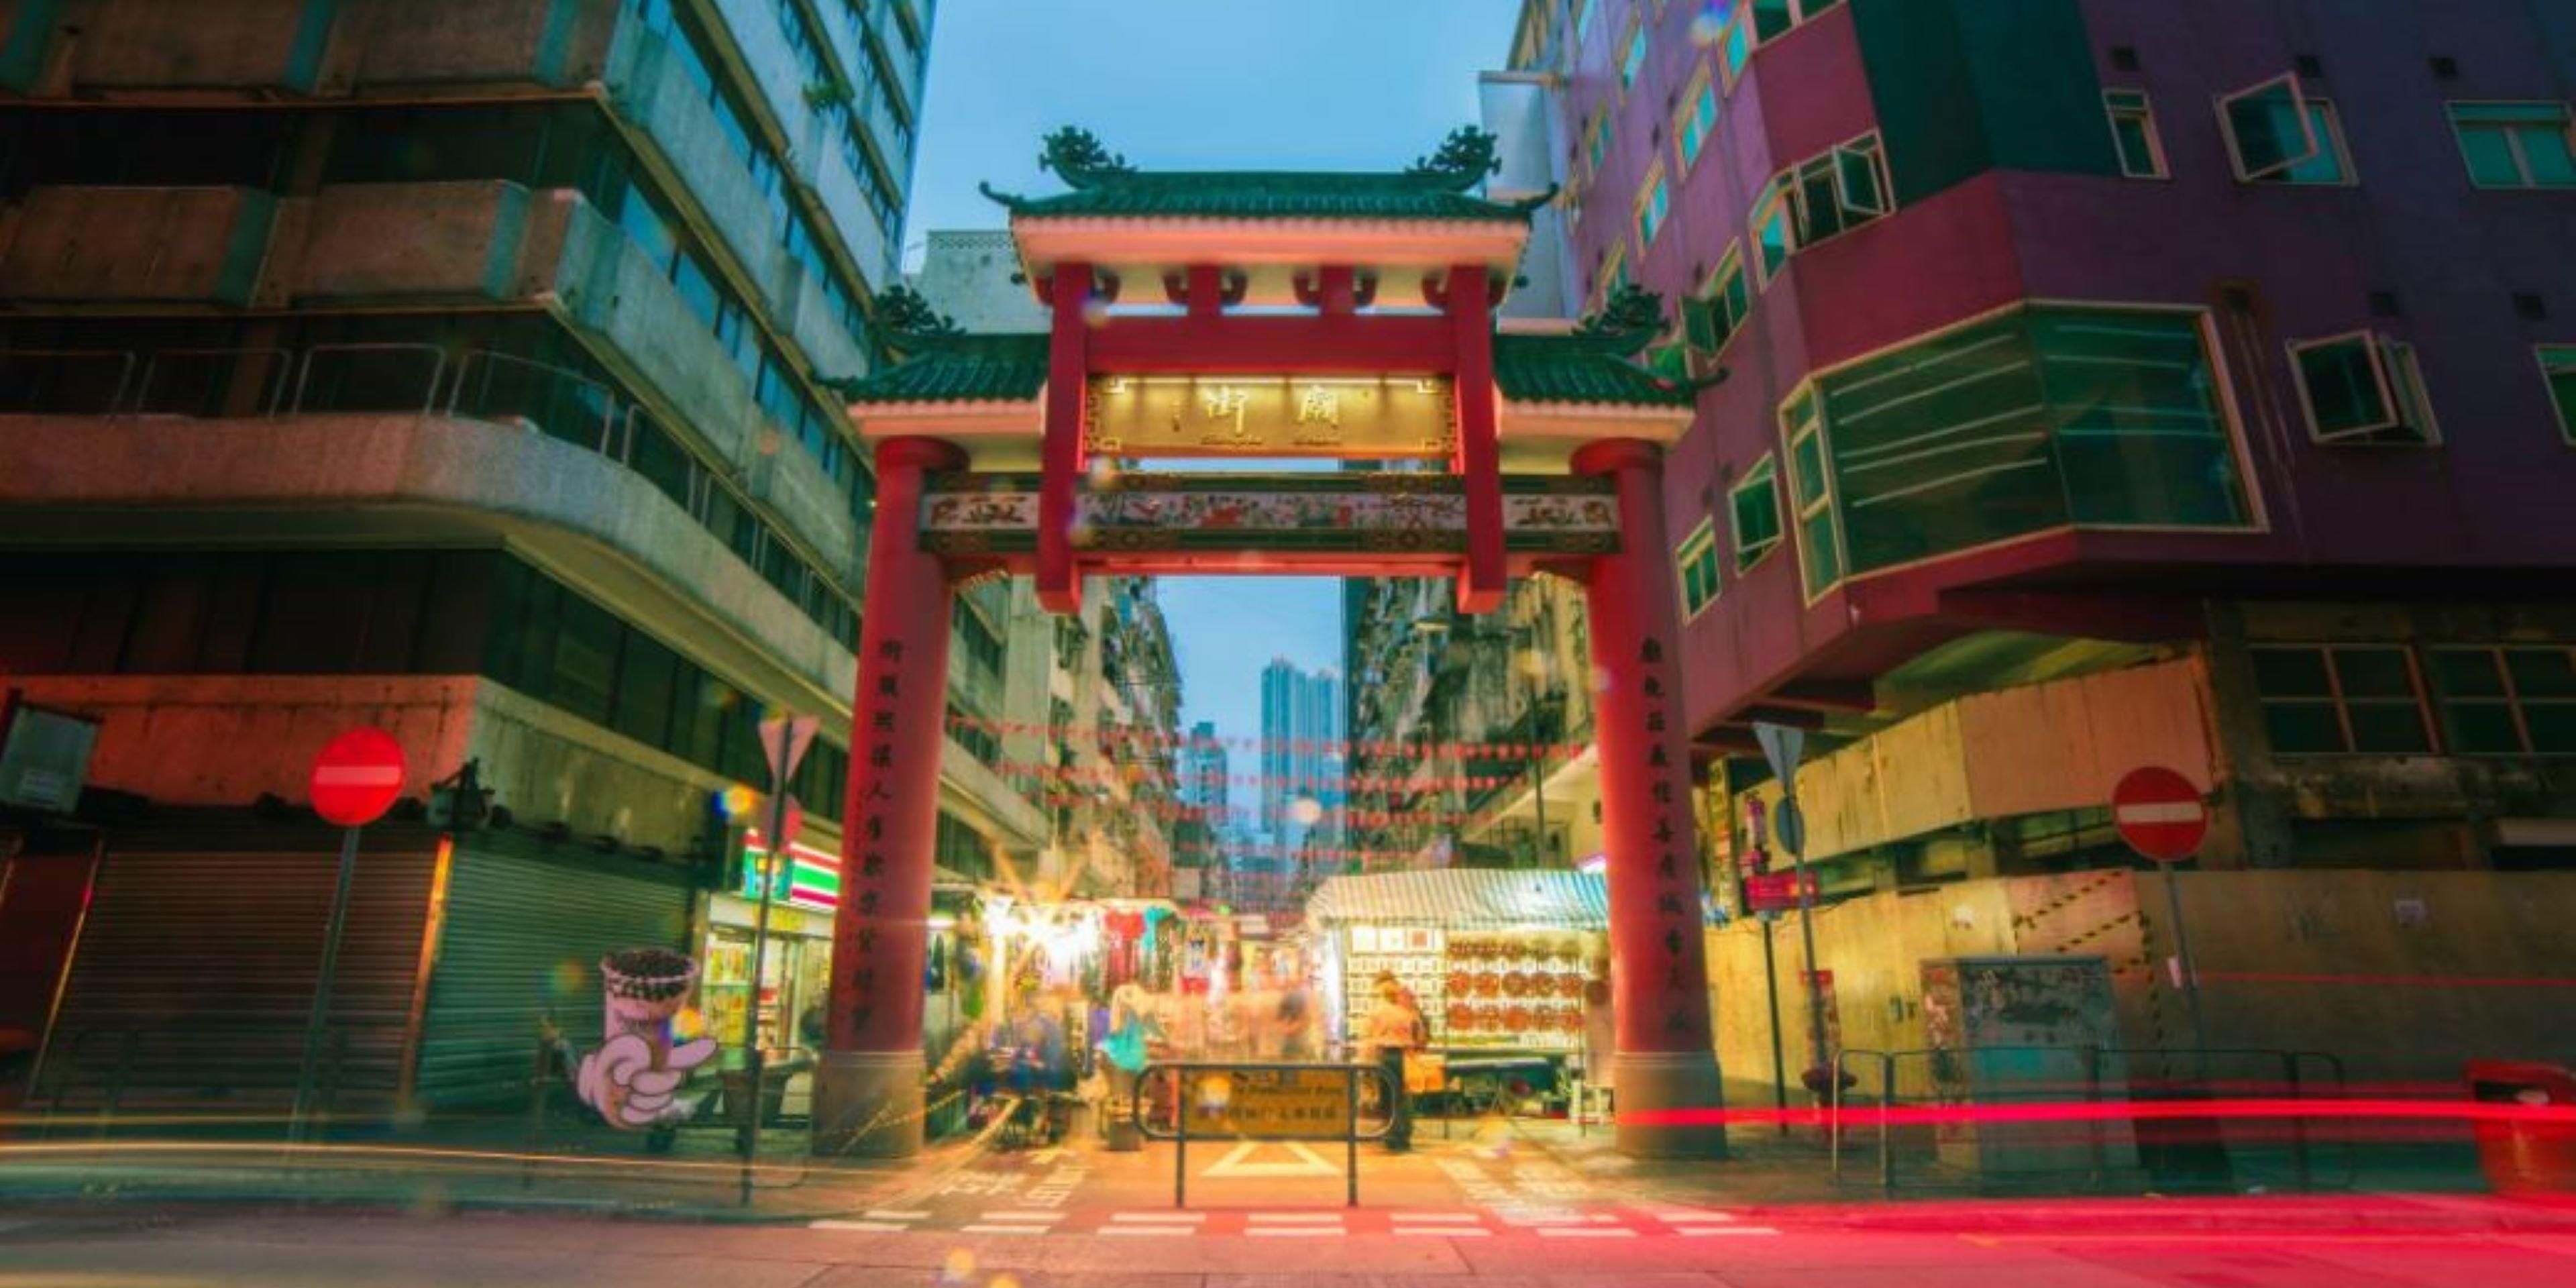 While in Houston, visit Chinatown with bustling shops, restaurants, and grocery stores. Stop by the Hong Kong Food Market specializing in seafood and Asian produce. Try Vietnamese crawfish at the Crawfish Cafe, or stroll down Harwin Drive for discount shopping.  Finish the day with a reflexology massage at Lucky Feet. 